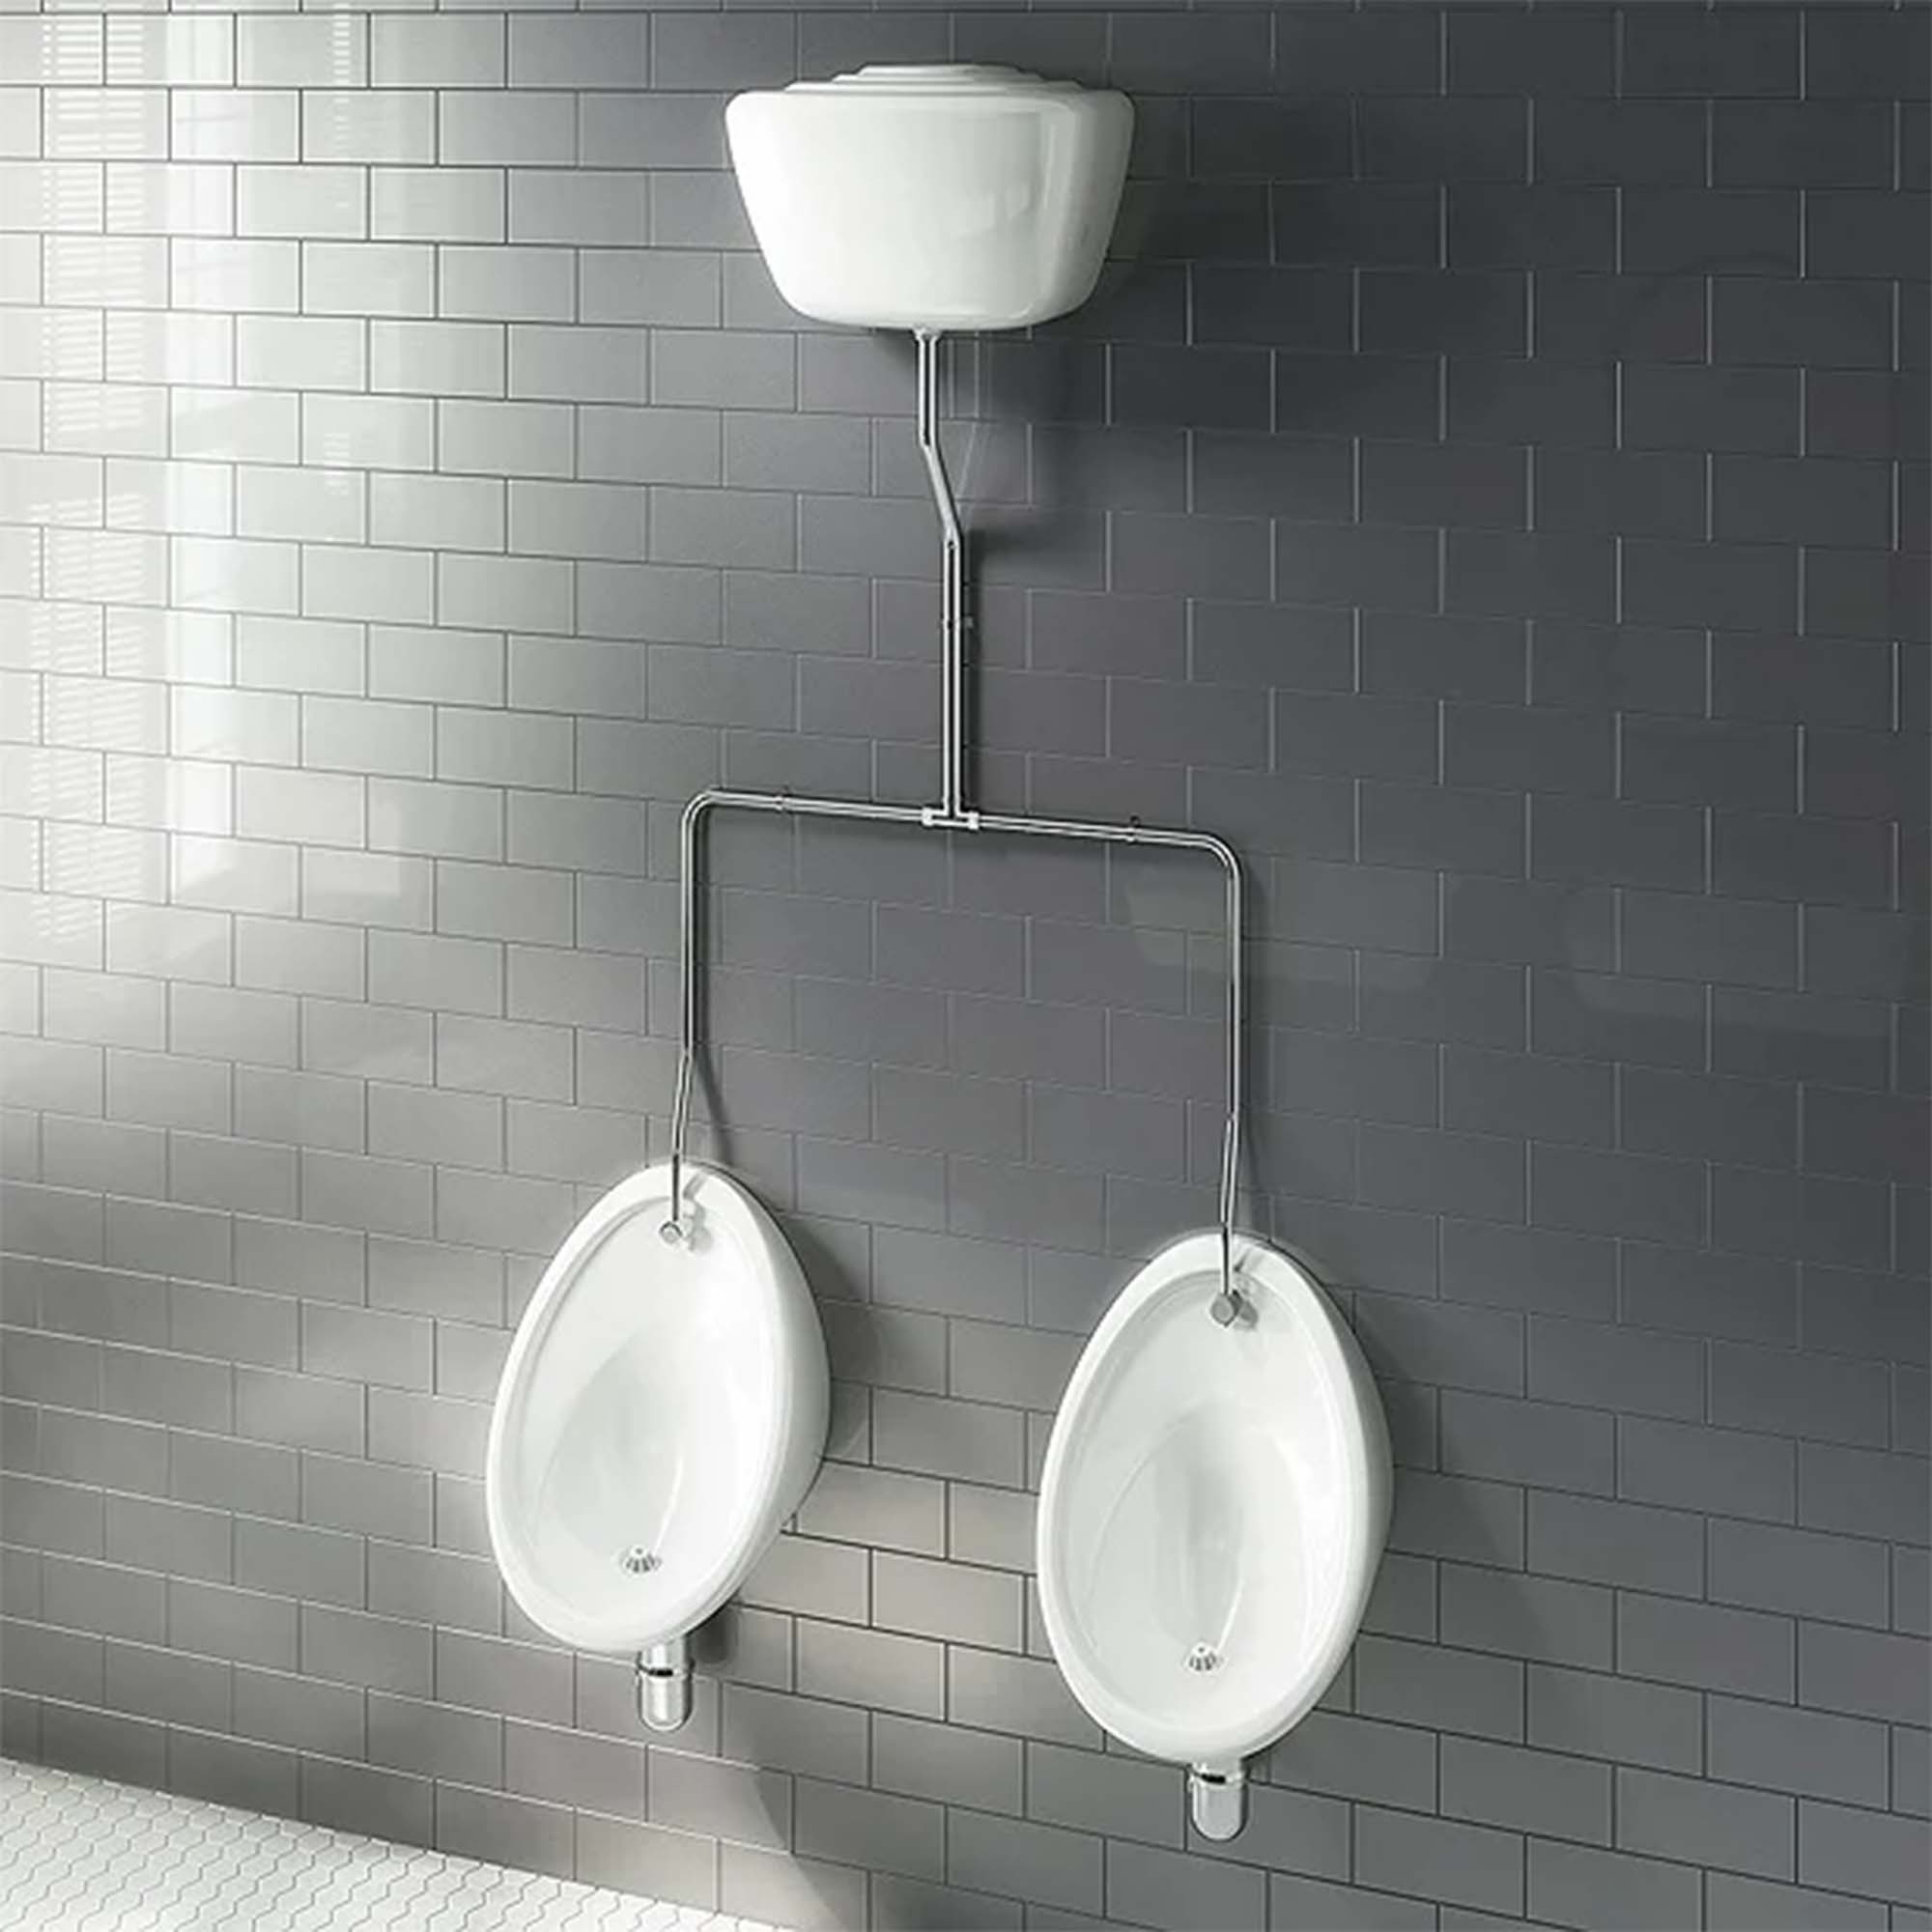 exposed urinal pack 2x500mm urinal bowls with 9l ceramic cistern